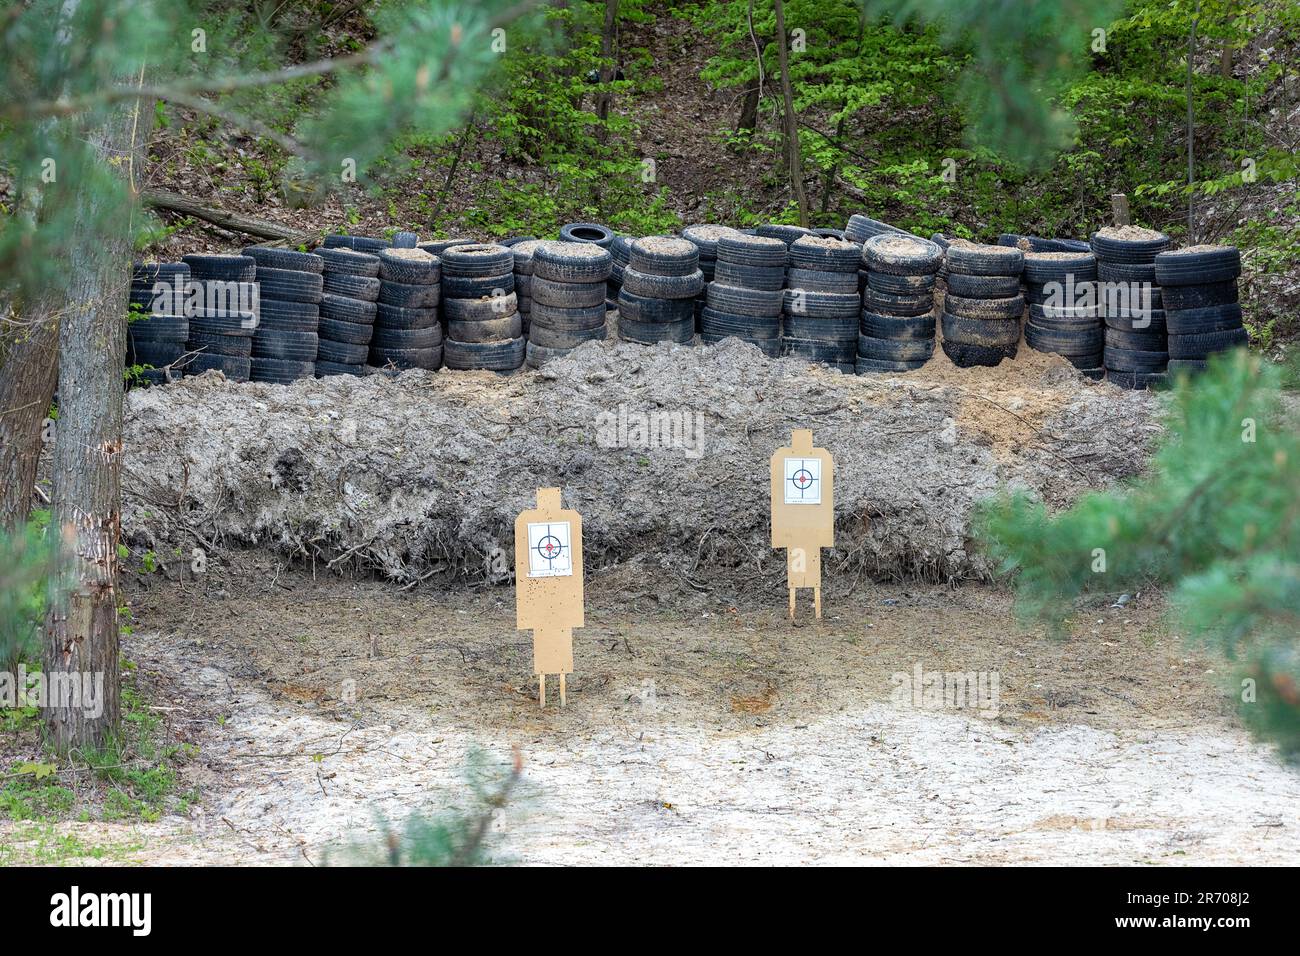 Wooden targets in a shooting range set up in a forest ravine. Stock Photo